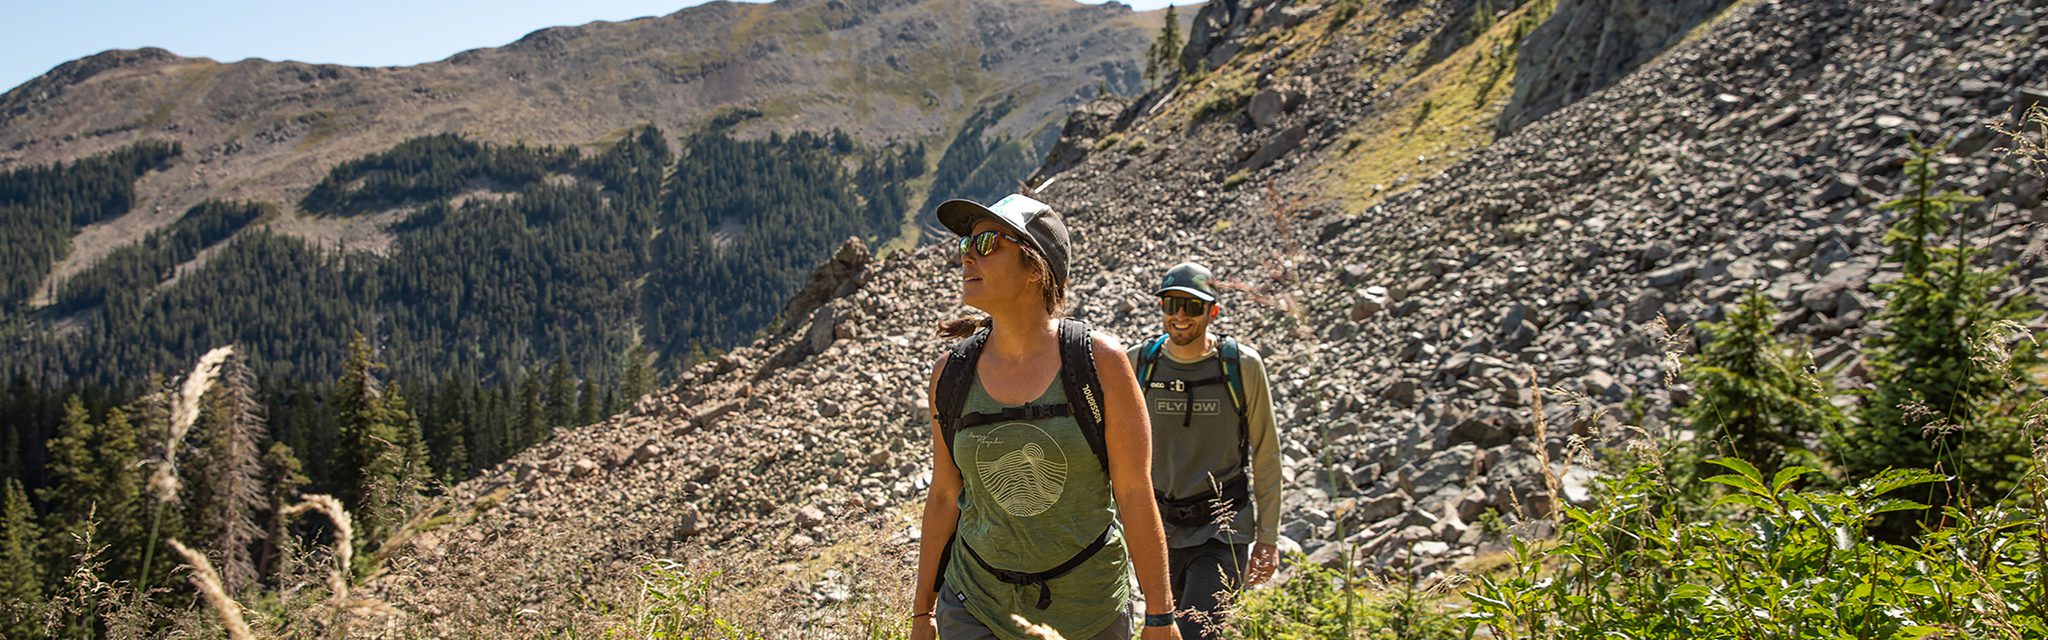 A man and woman hike in front of a rocky mountain face in Taos Ski Valley